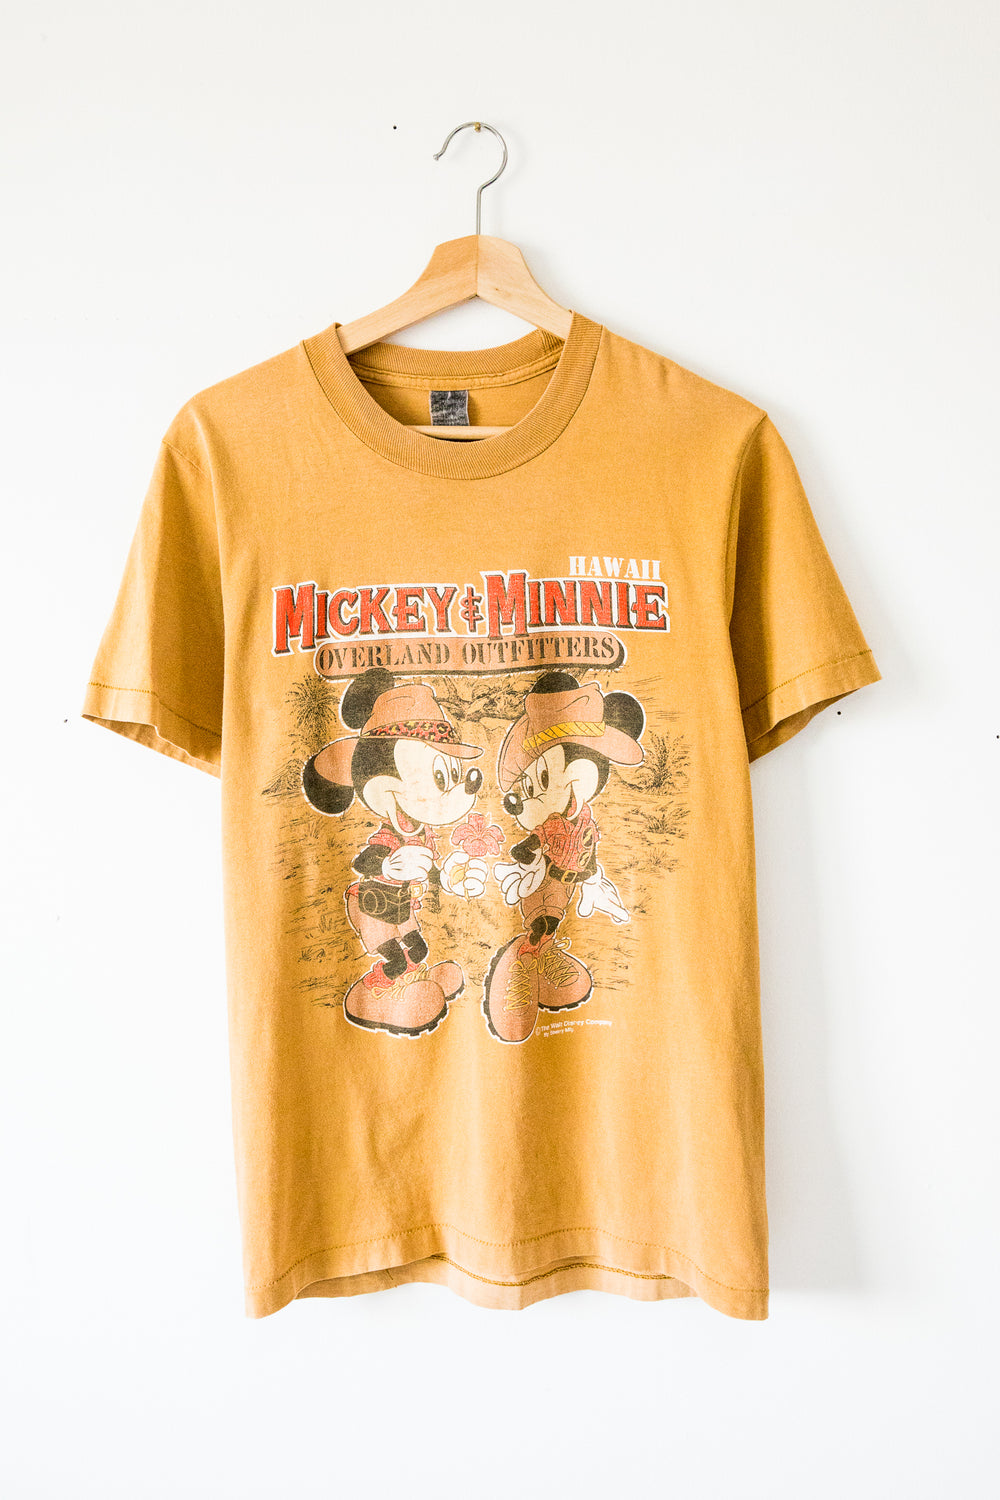 Mickey + Minnie Outfitters Tee